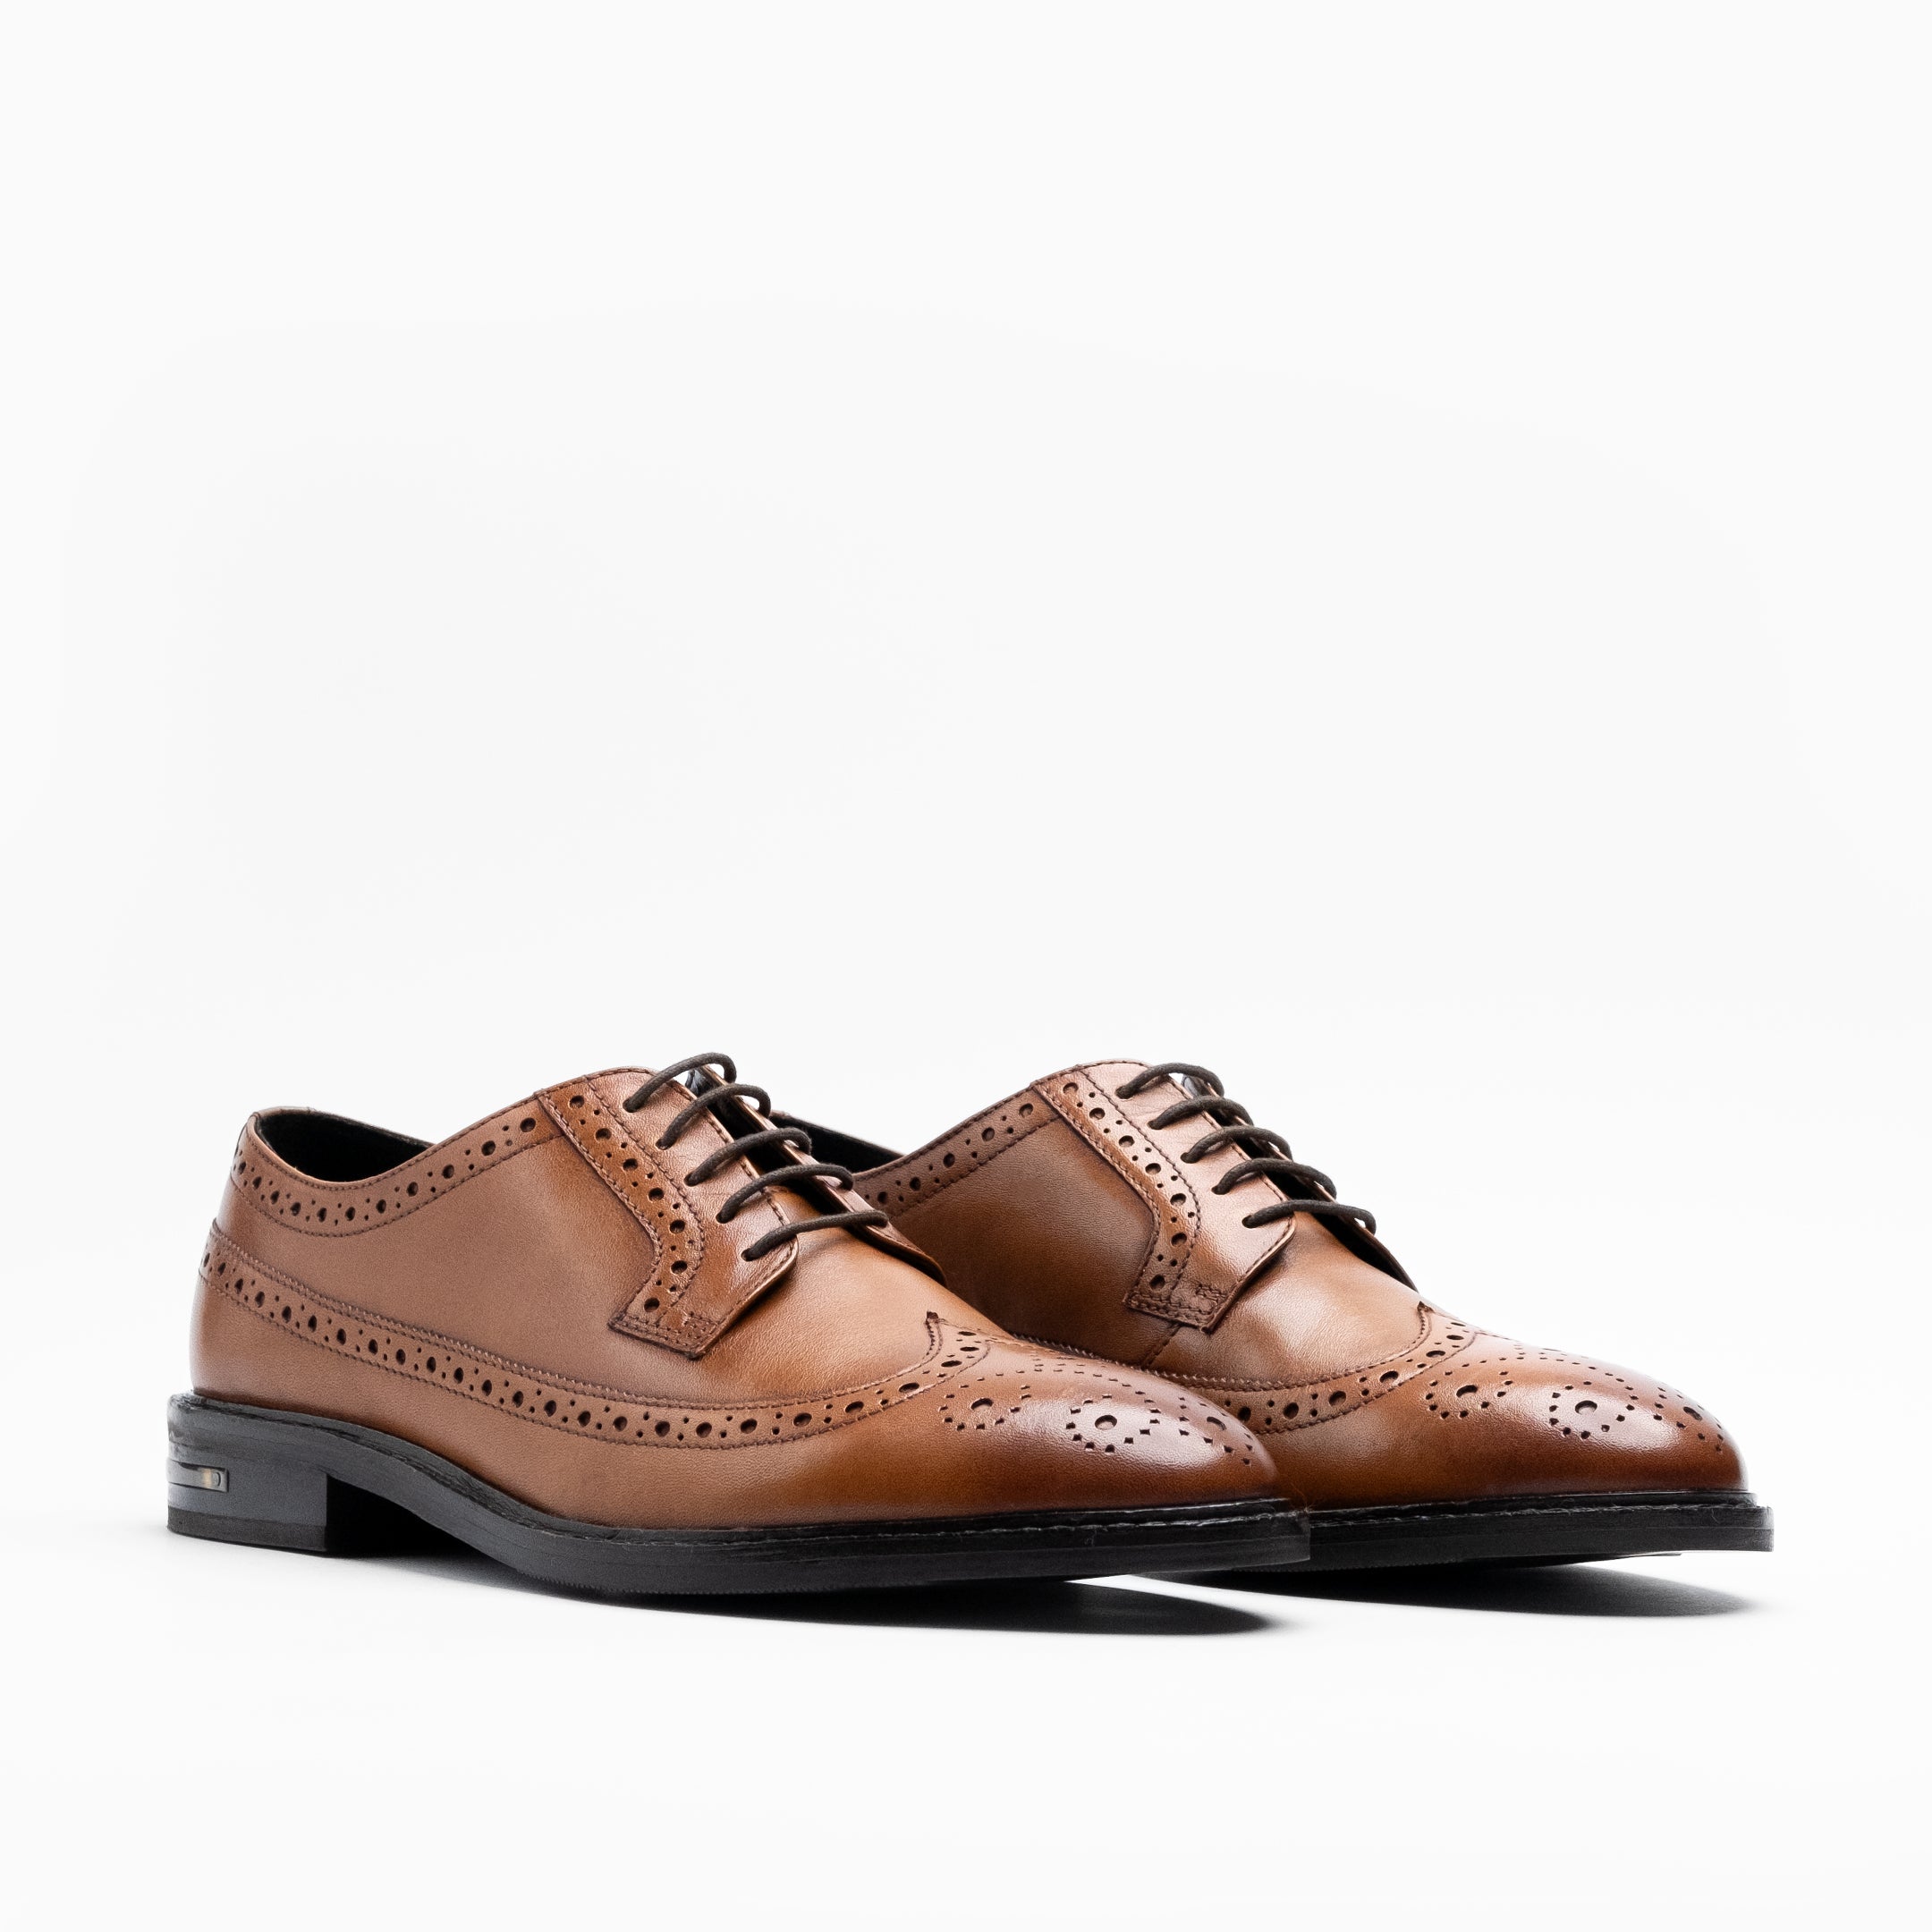 Walk London Mens Oliver Brogue Shoe in Tan Leather